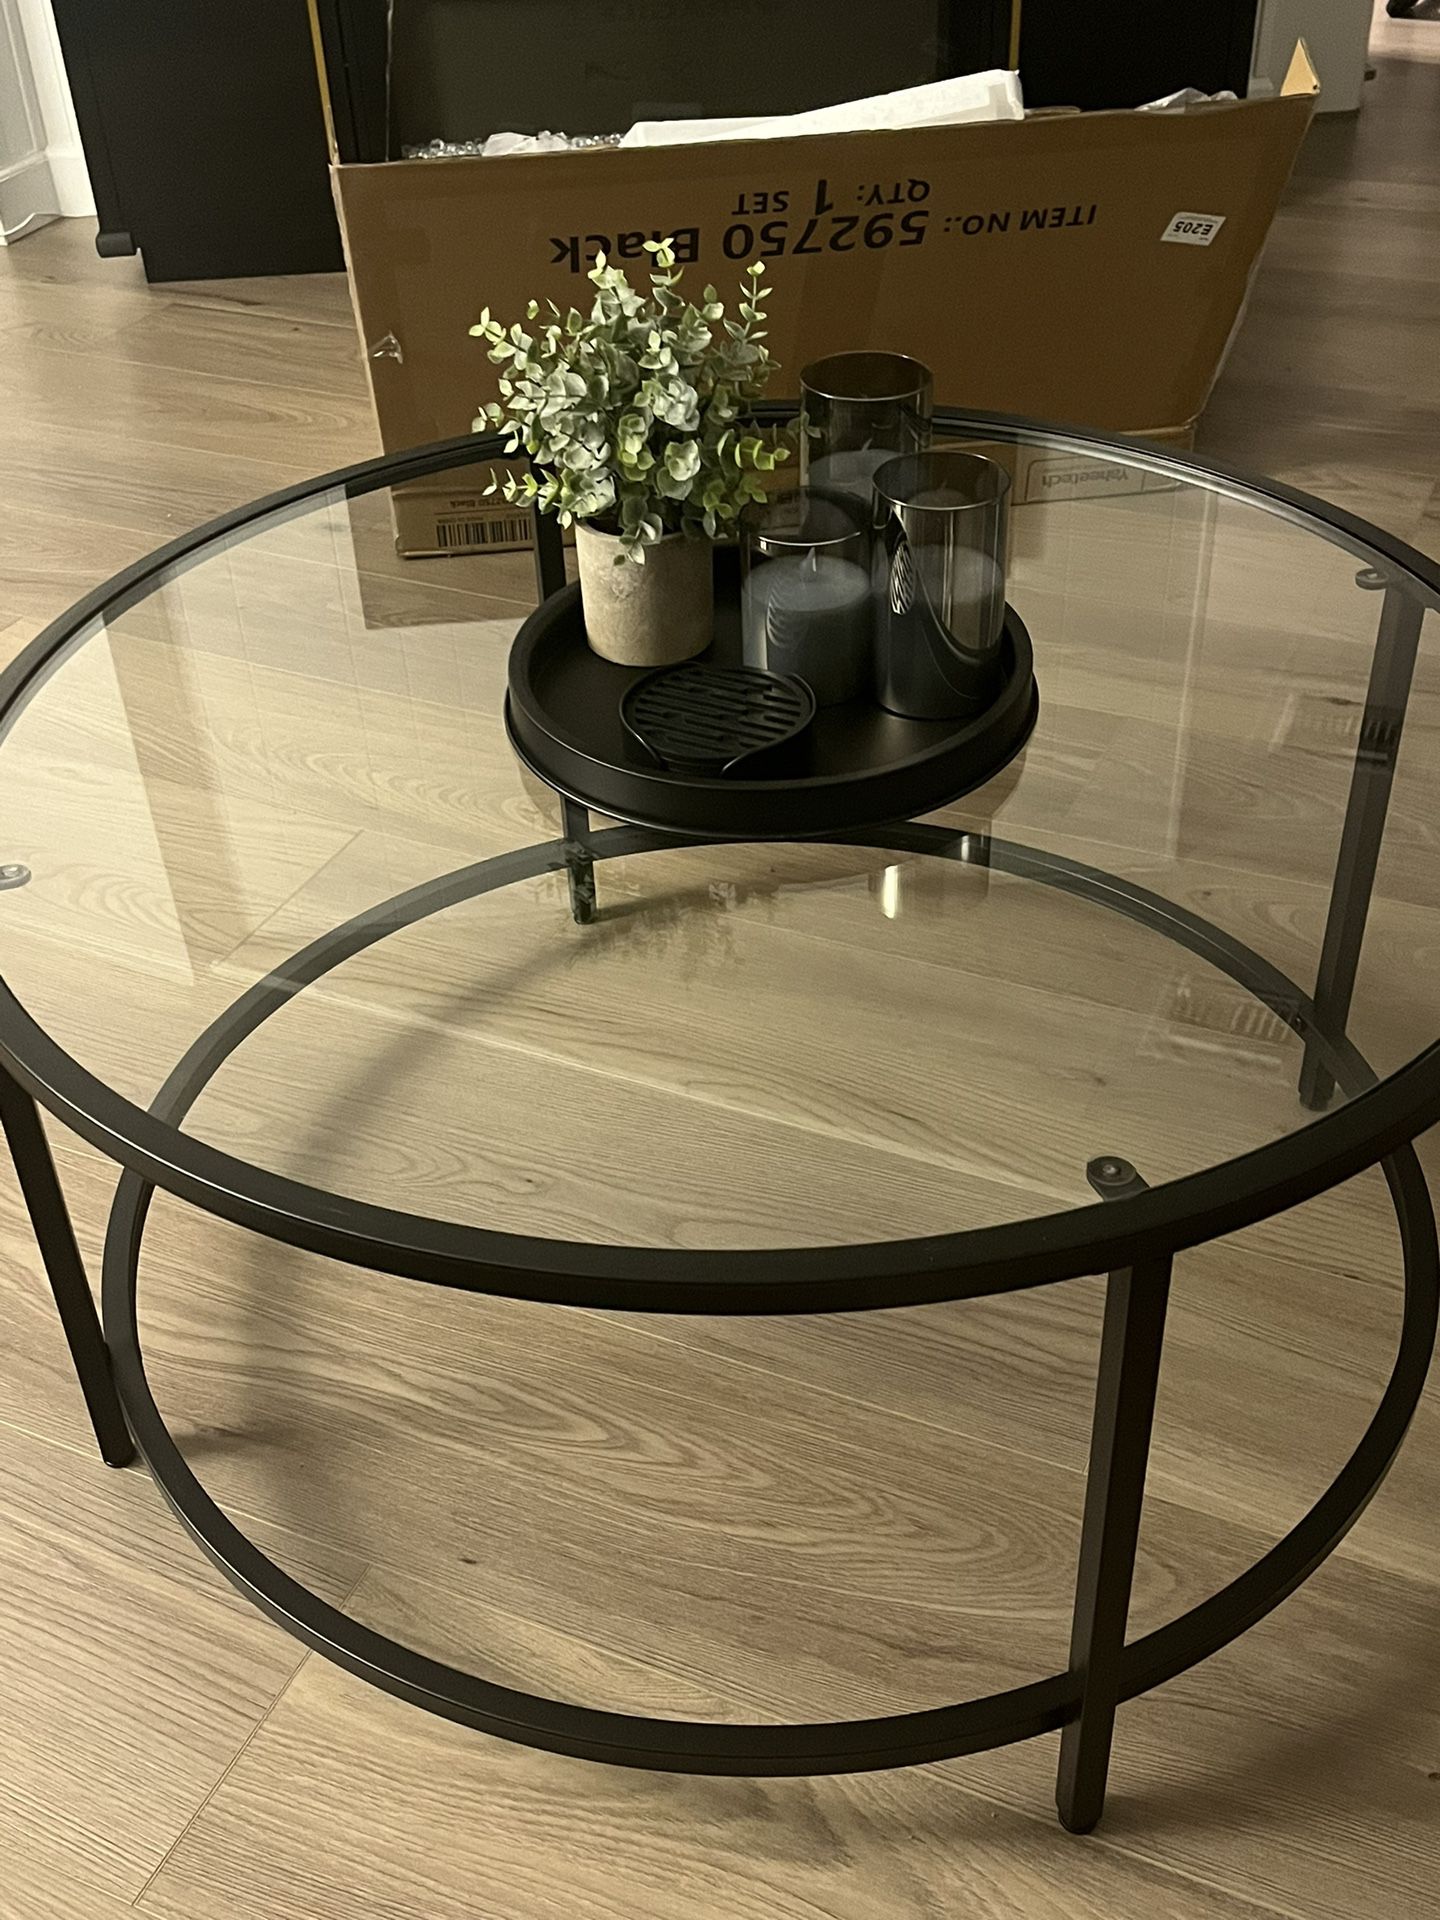 36" Round Glass Coffee Table